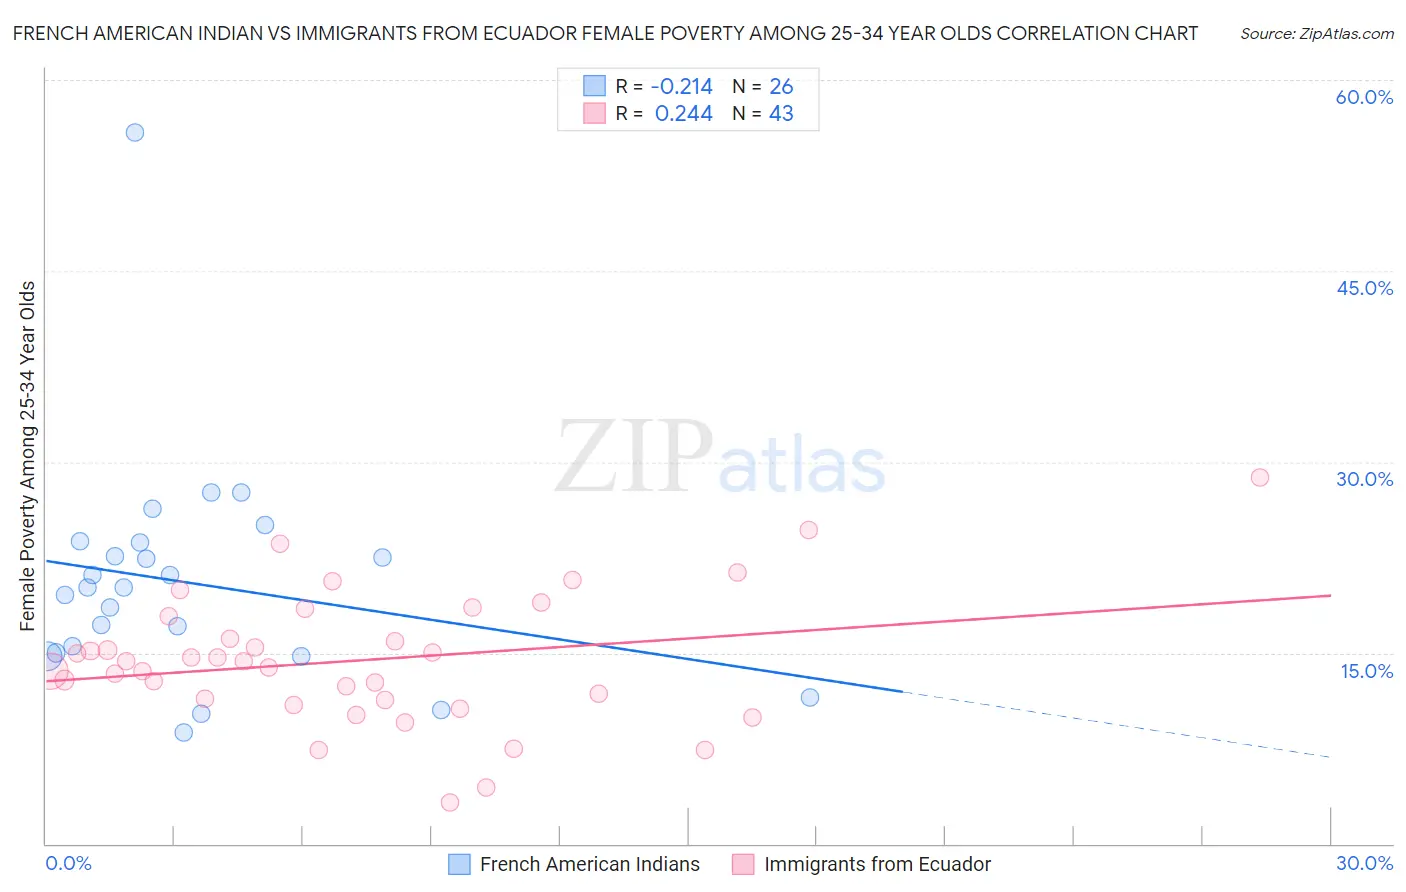 French American Indian vs Immigrants from Ecuador Female Poverty Among 25-34 Year Olds